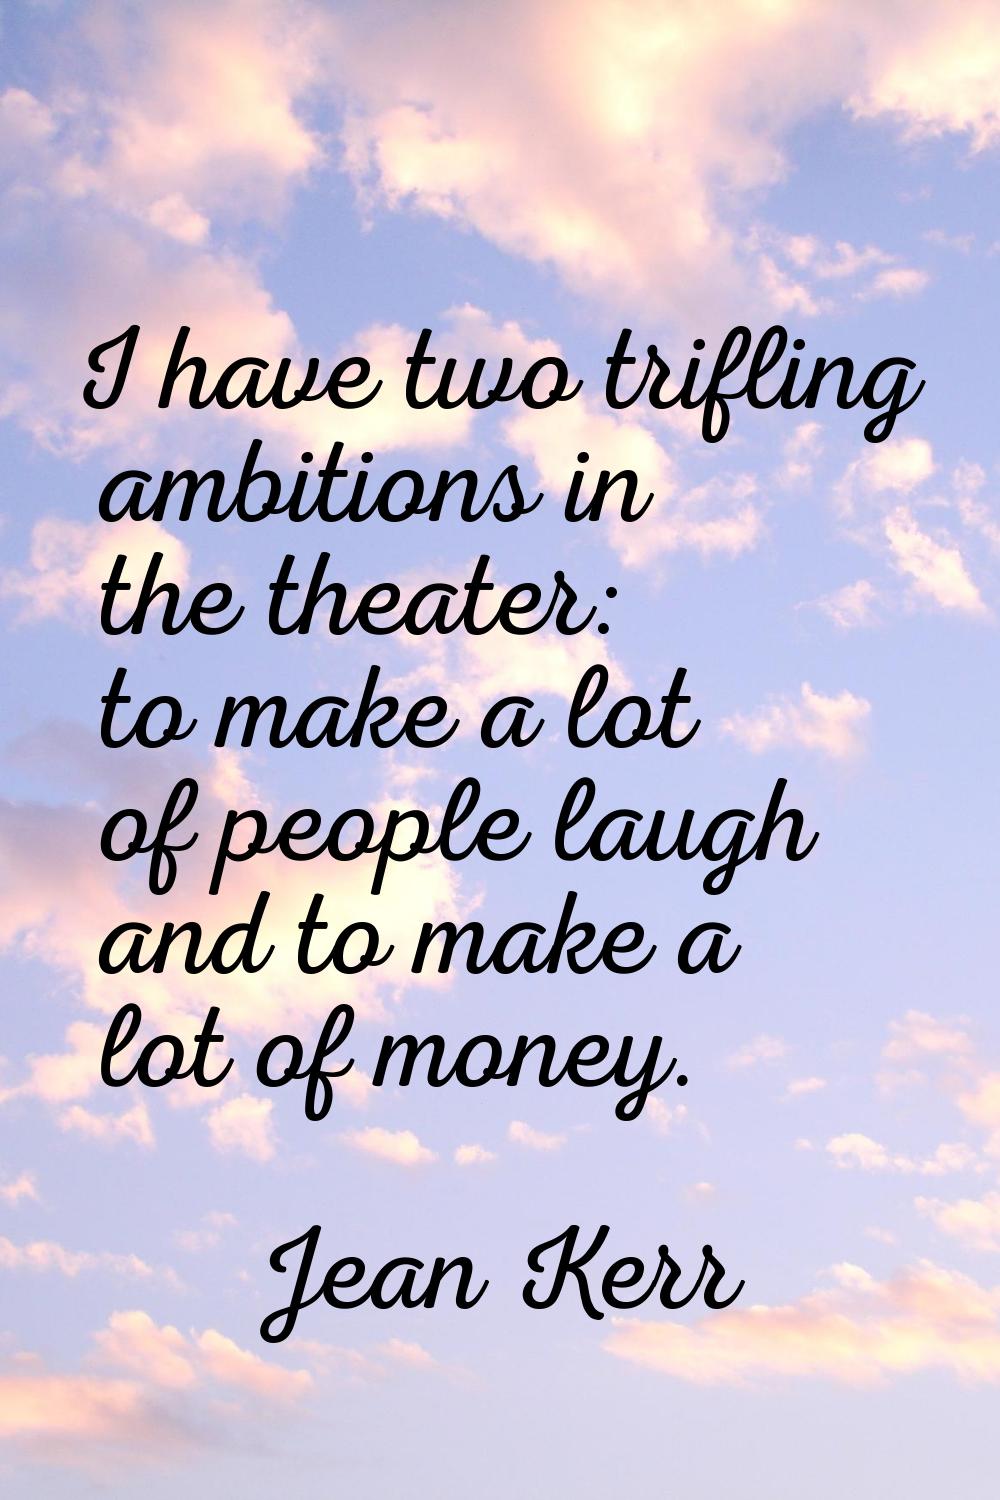 I have two trifling ambitions in the theater: to make a lot of people laugh and to make a lot of mo